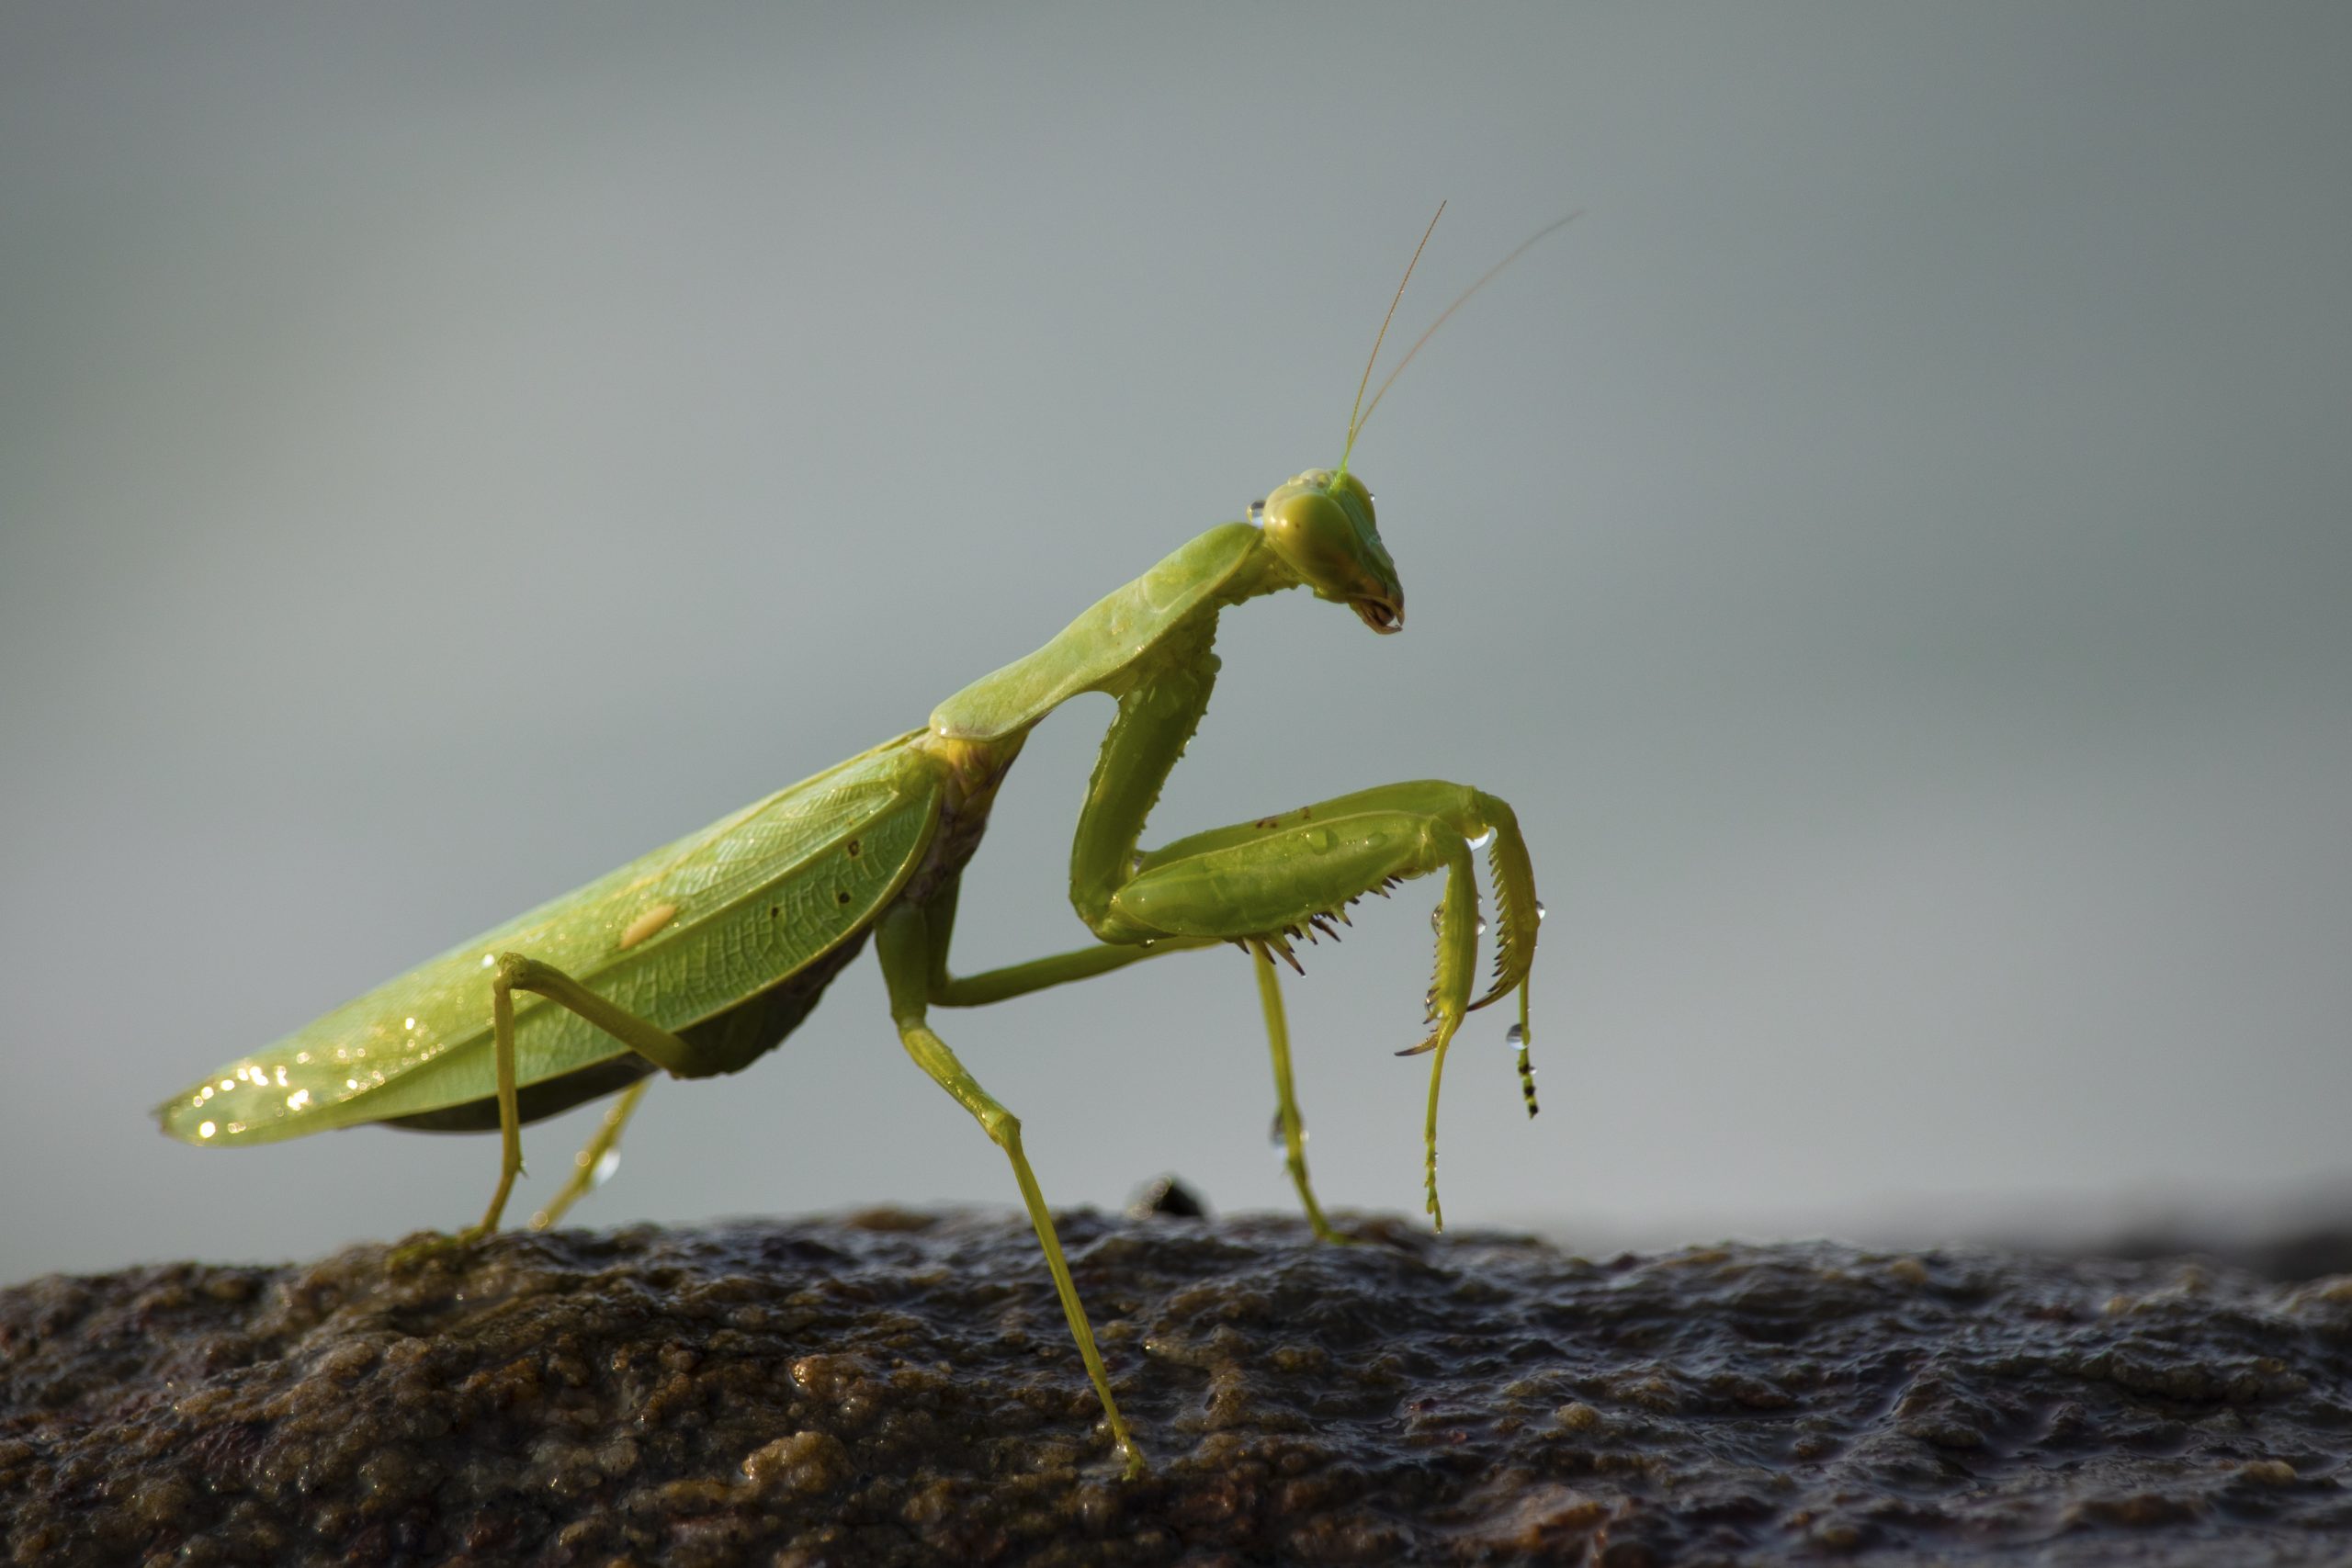 A mantis on surface